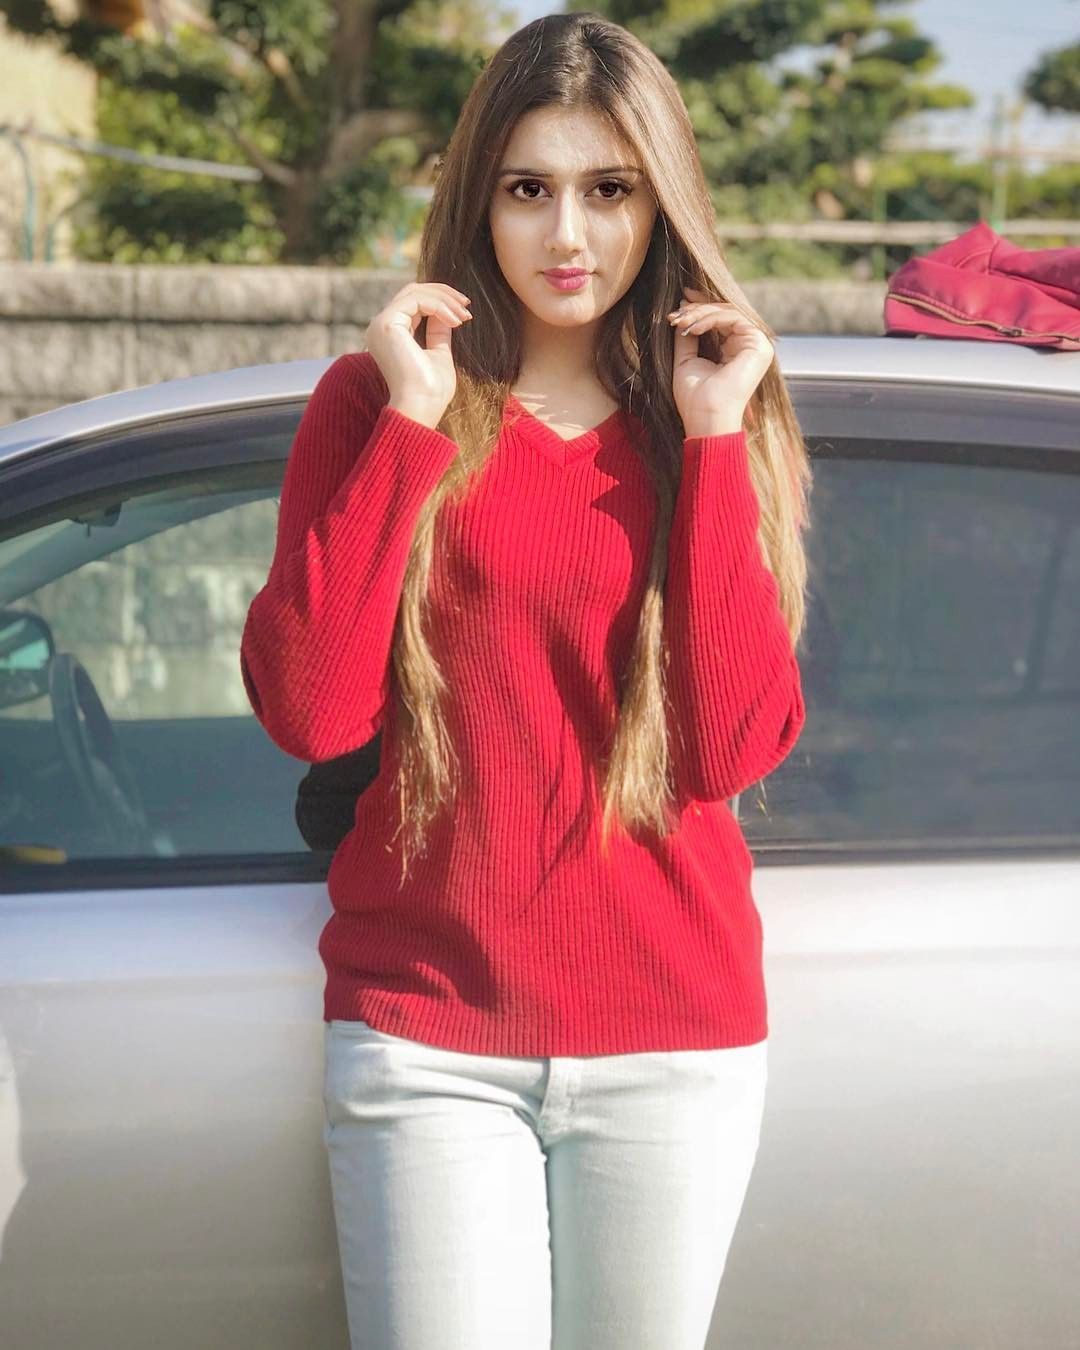 Pakistani Fashion Model and Musician Jannat Mirza is extremely.